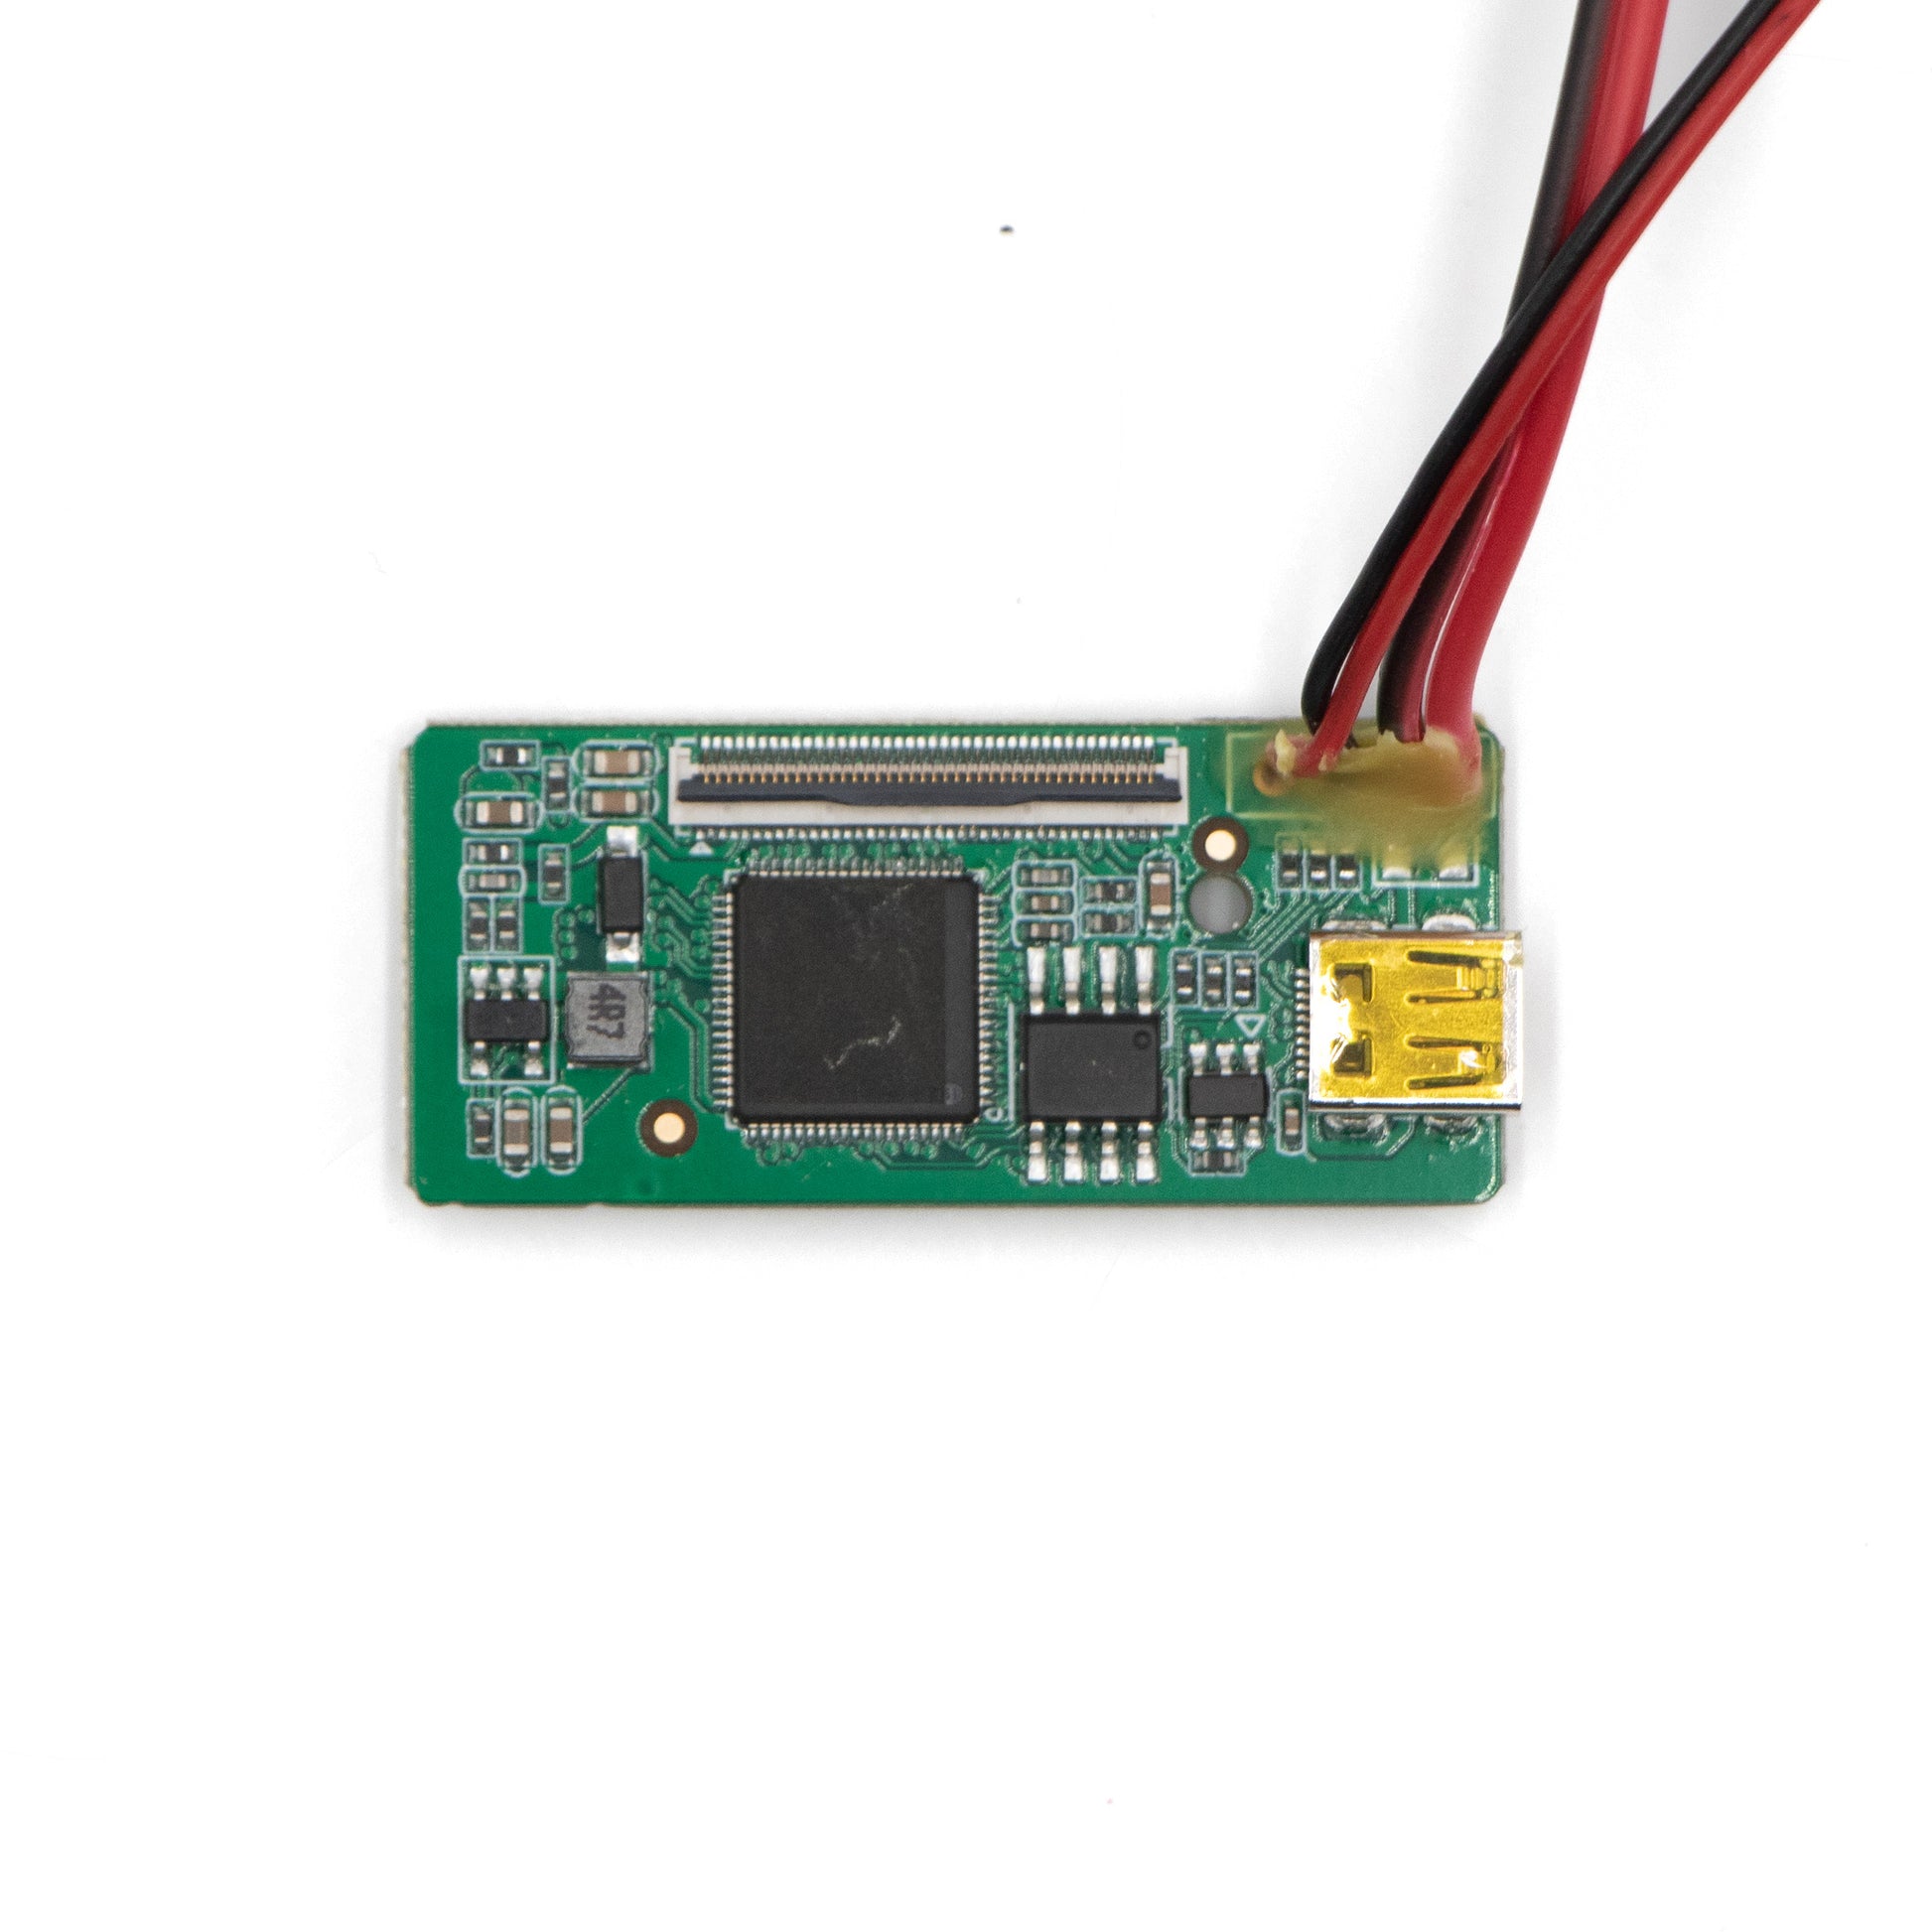 HDMI to LVDS adapter board for AR glasses that supports a single screen